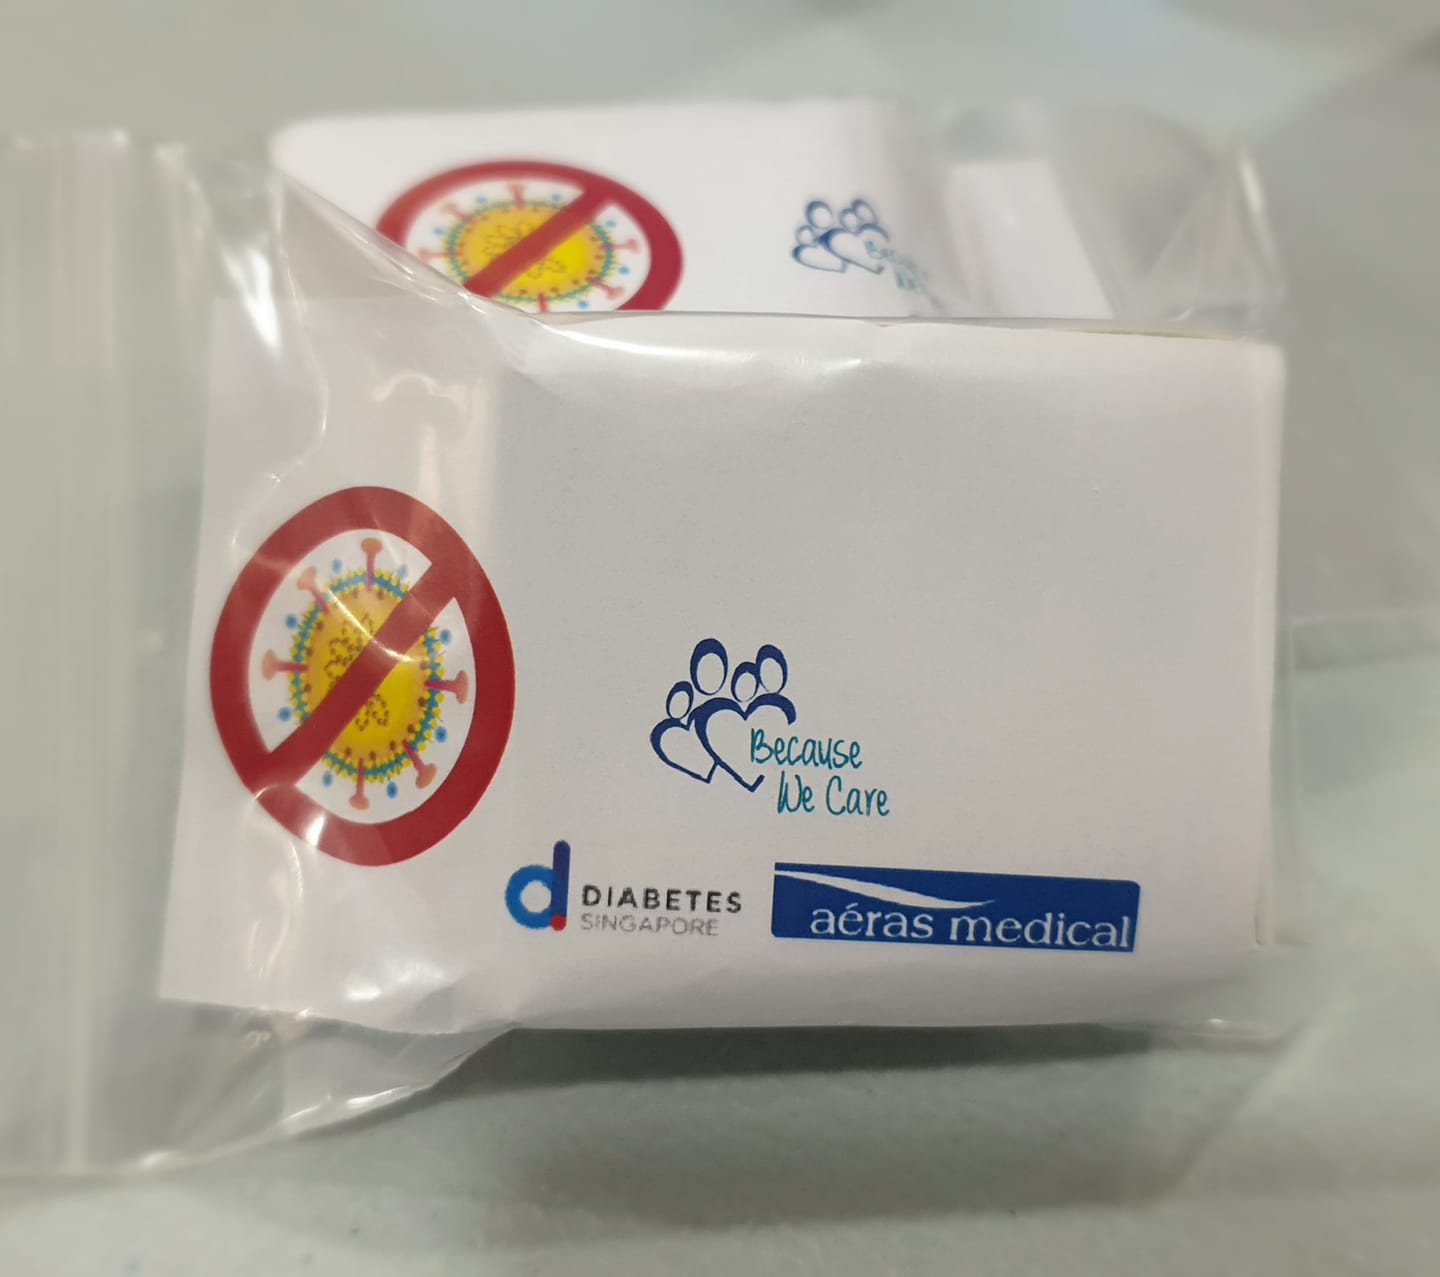 Diabetes Singapore Giving Free Alcohol Swabs Because People Have Hoarded Alcohol Swabs from Pharmacies